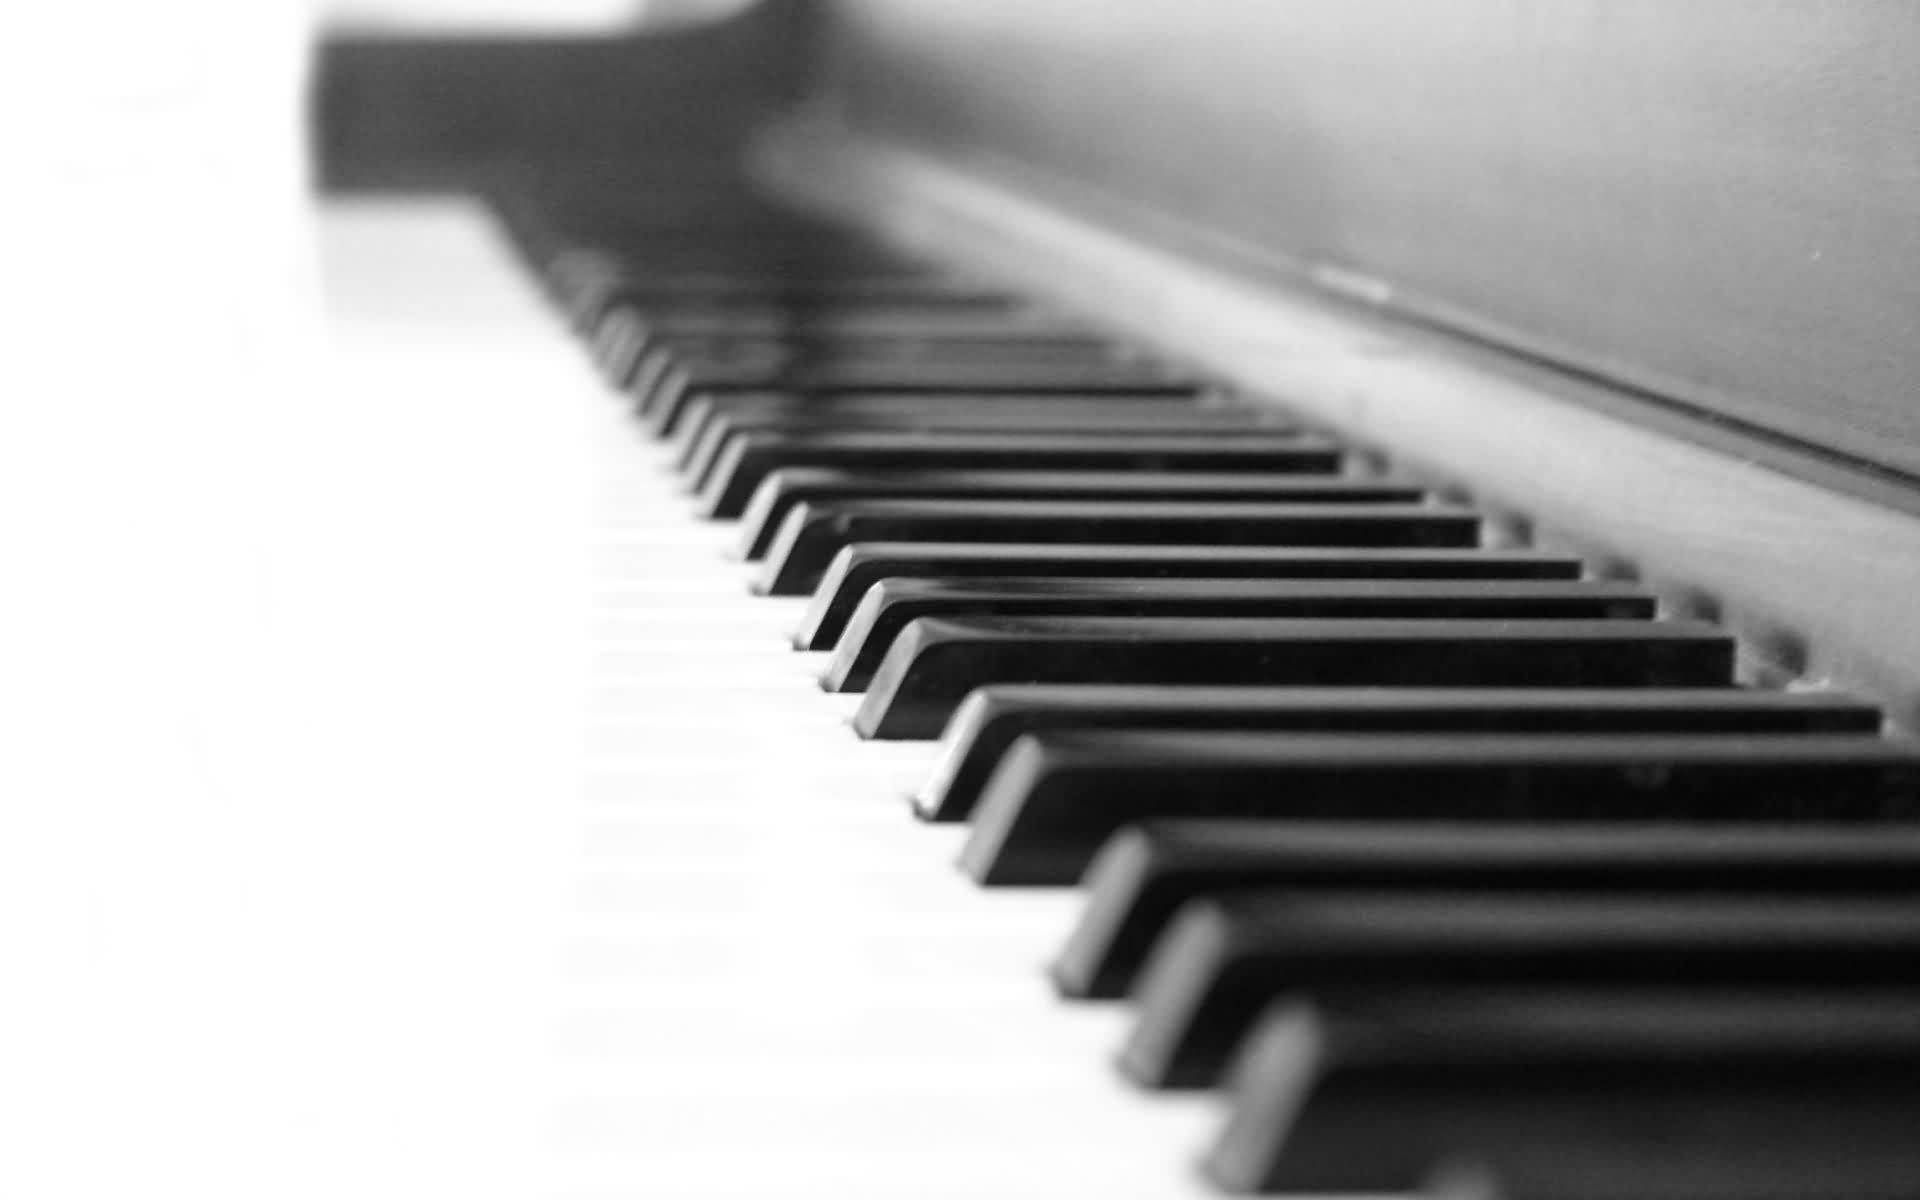 Free Piano Wallpaper Downloads, [200+] Piano Wallpapers for FREE |  